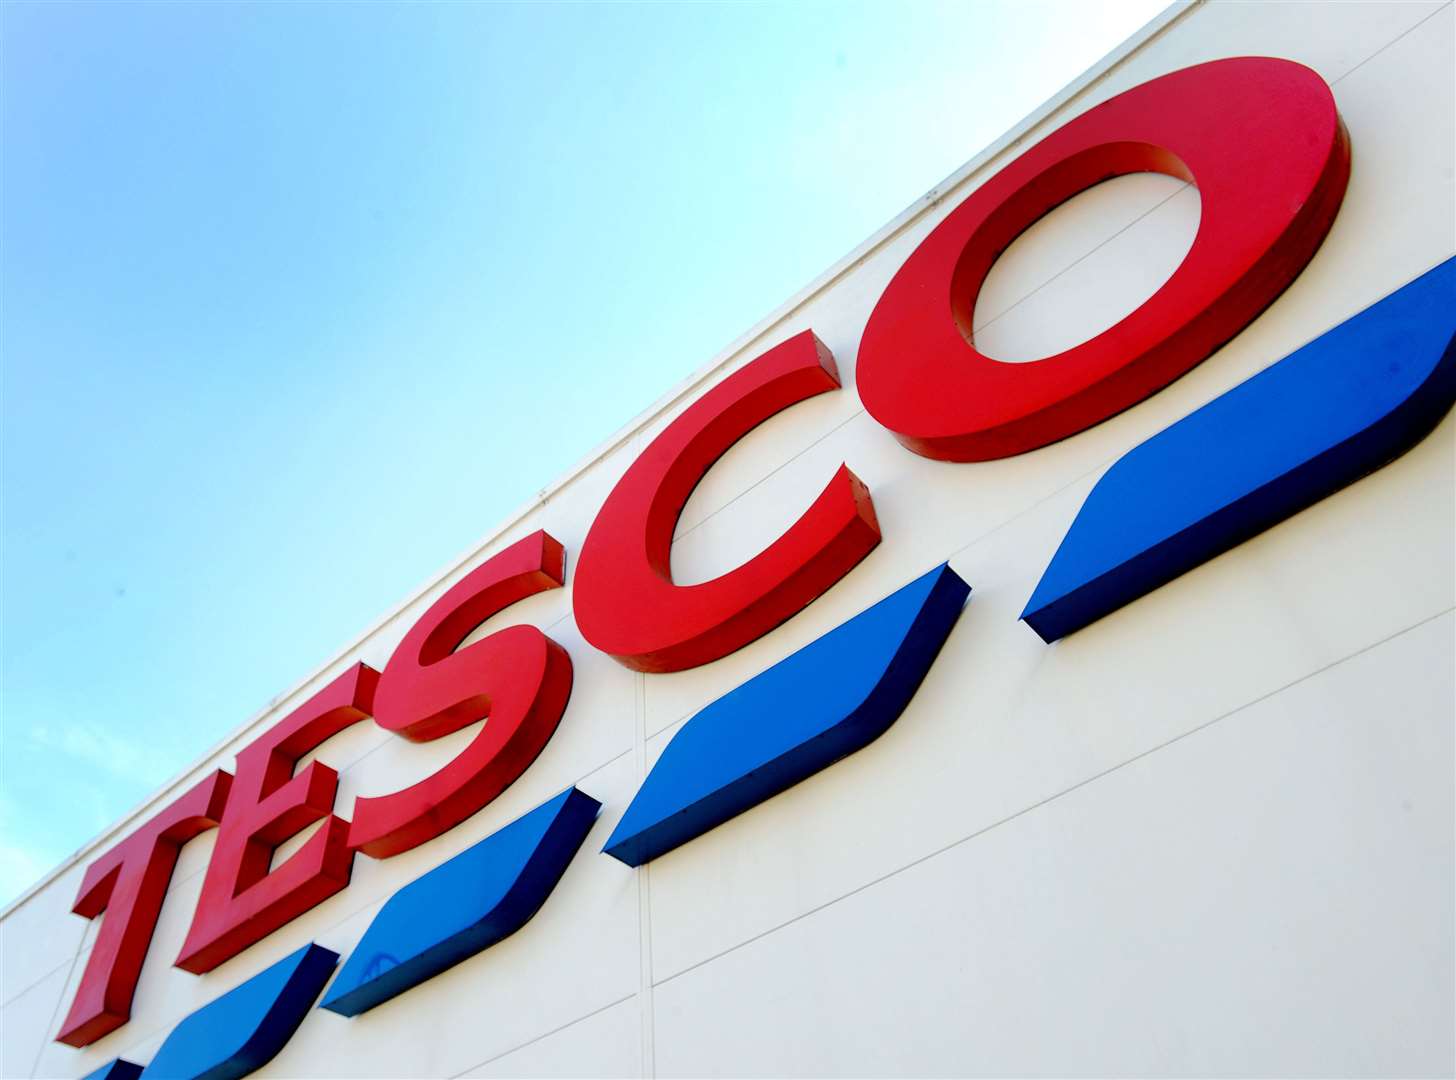 Mr Stewart was finance boss at Tesco during its turnaround following an accounting scandal in 2014 (Nick Ansell/PA)